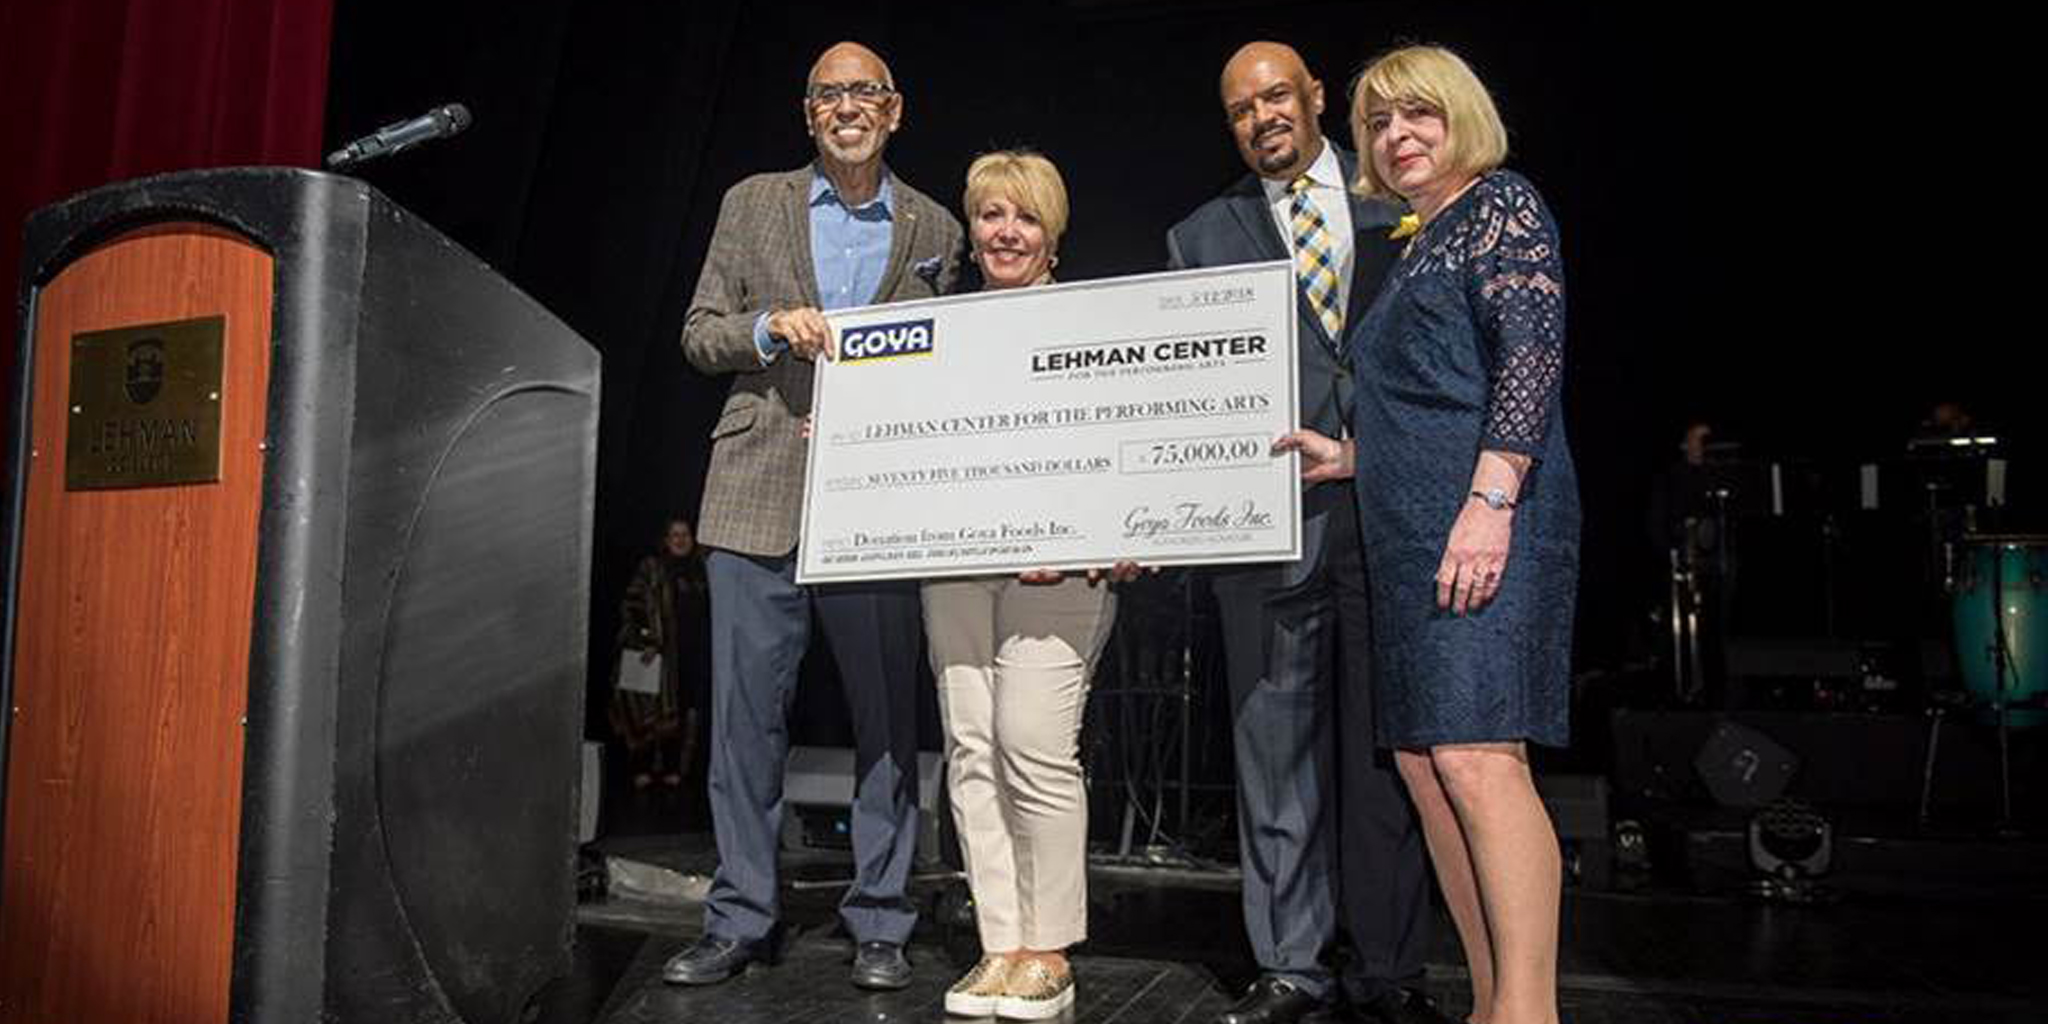 Goya Foods Announces Support of Lehman Center for the Performing Arts and Campus Food Bank